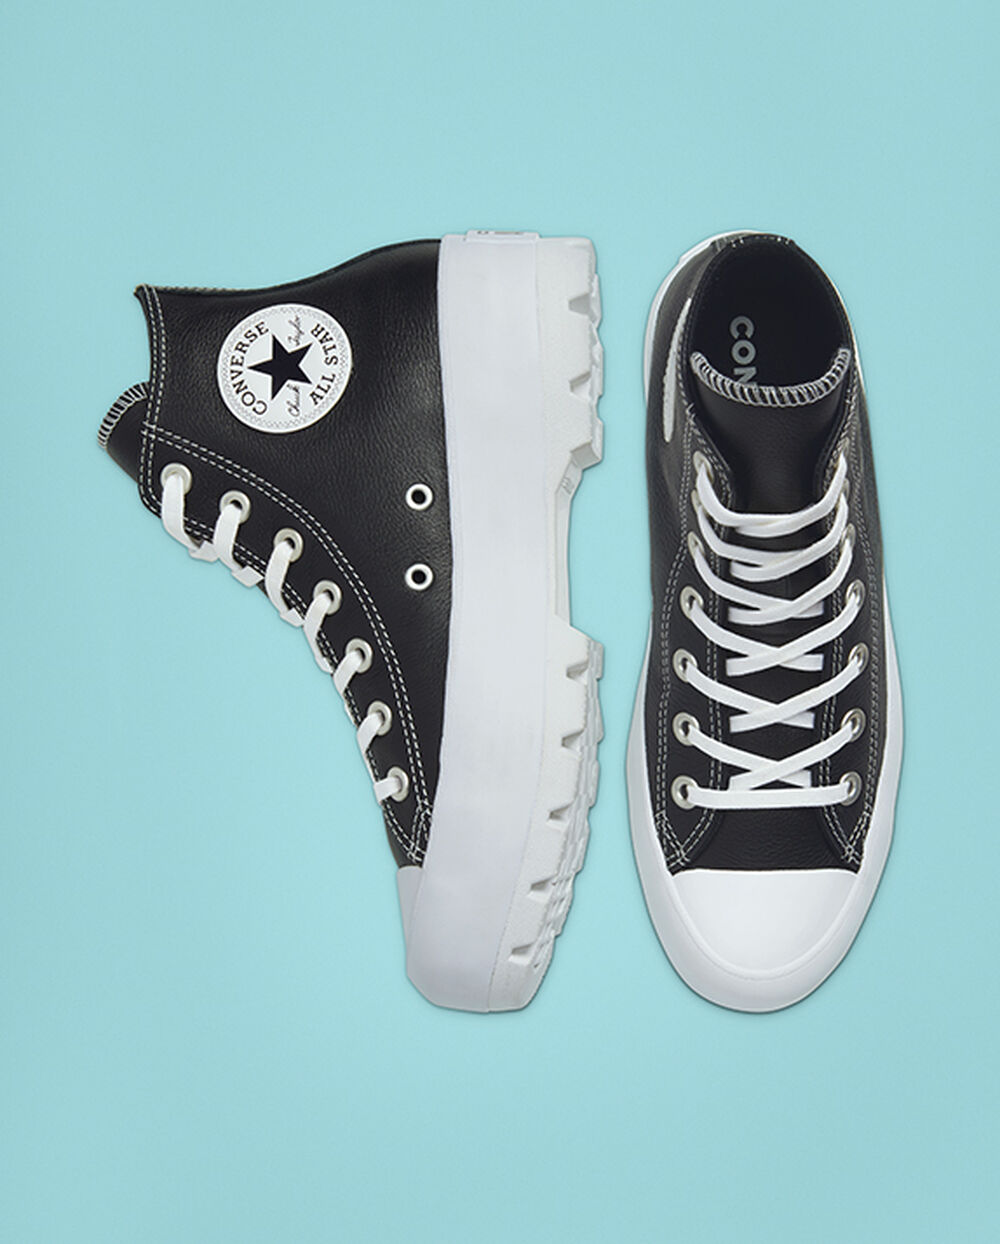 Tenis Converse Chuck Taylor All Star Mujer Negros Blancos | Mexico-527866